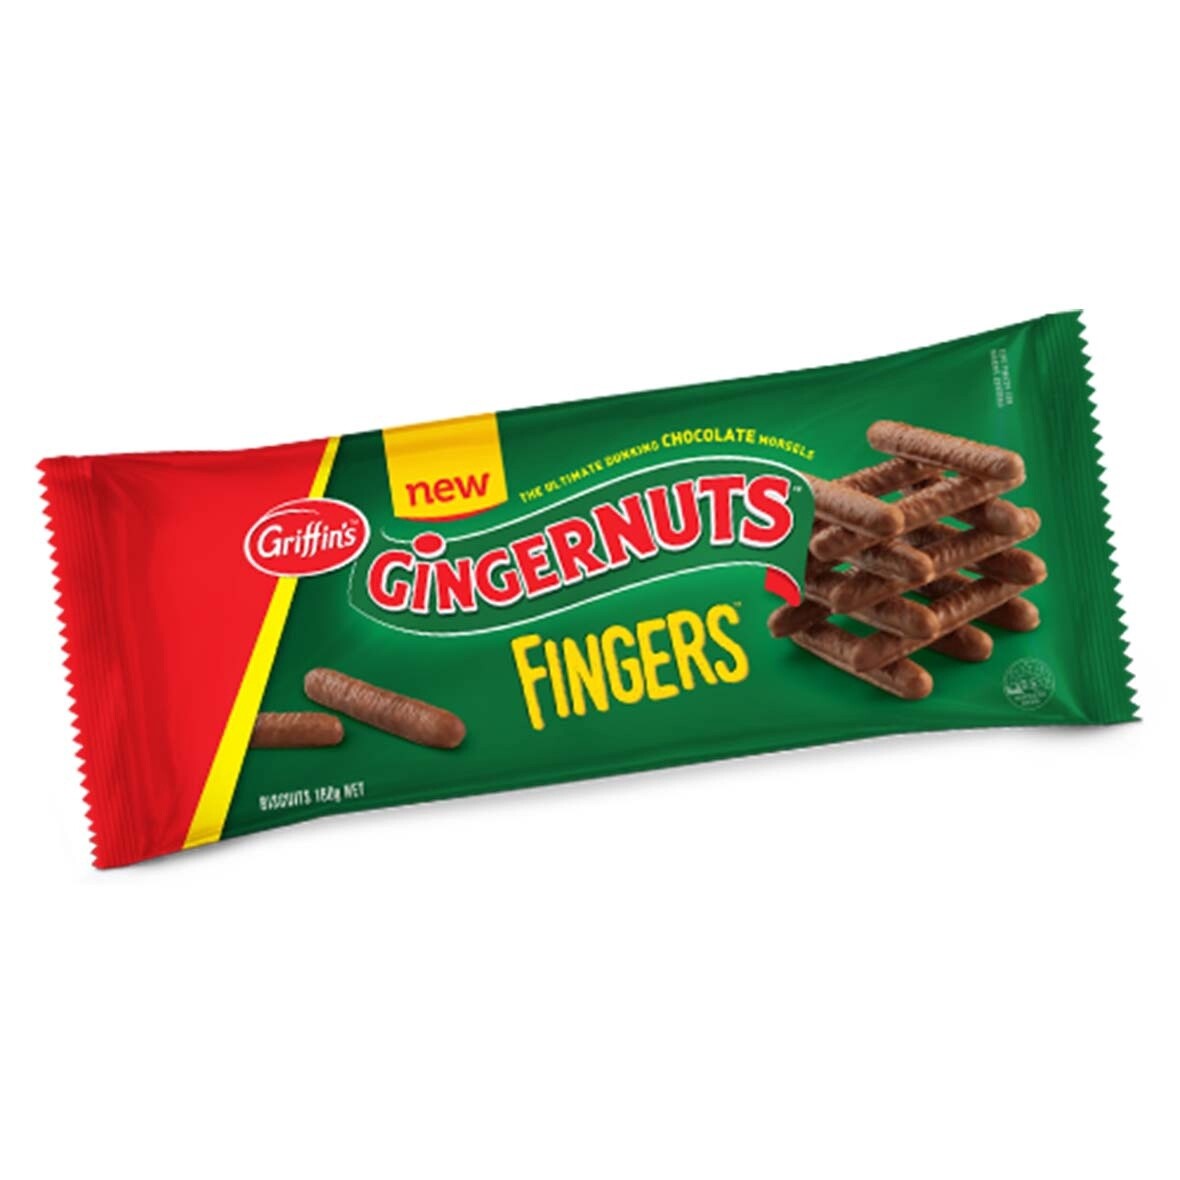 Gingernuts Fingers Chocolate biscuits 180g